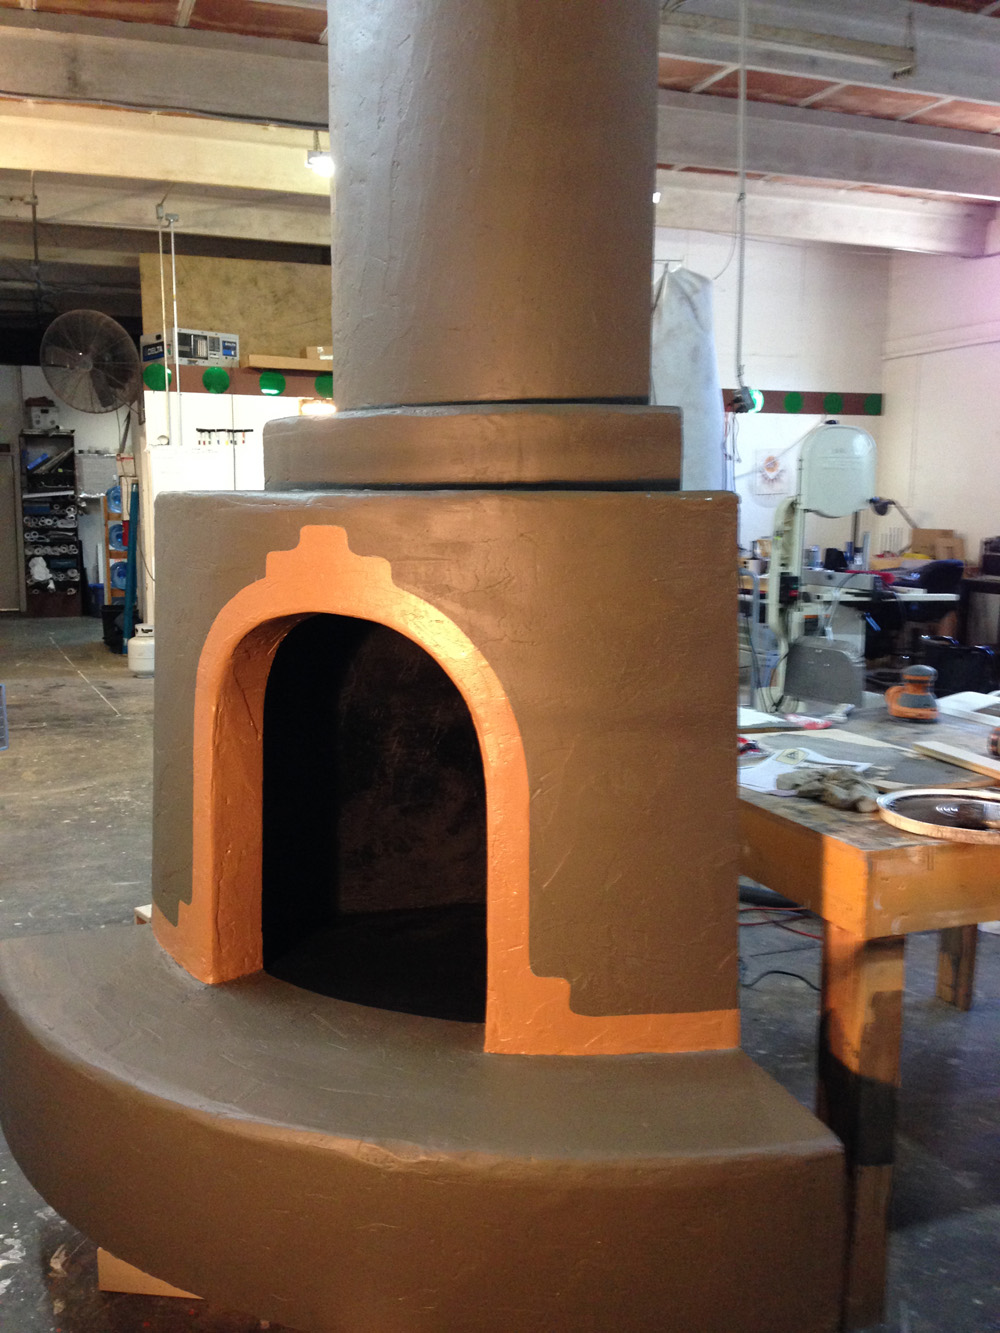 Kiva fireplace in our studio. Fabrication complete and ready for installation.